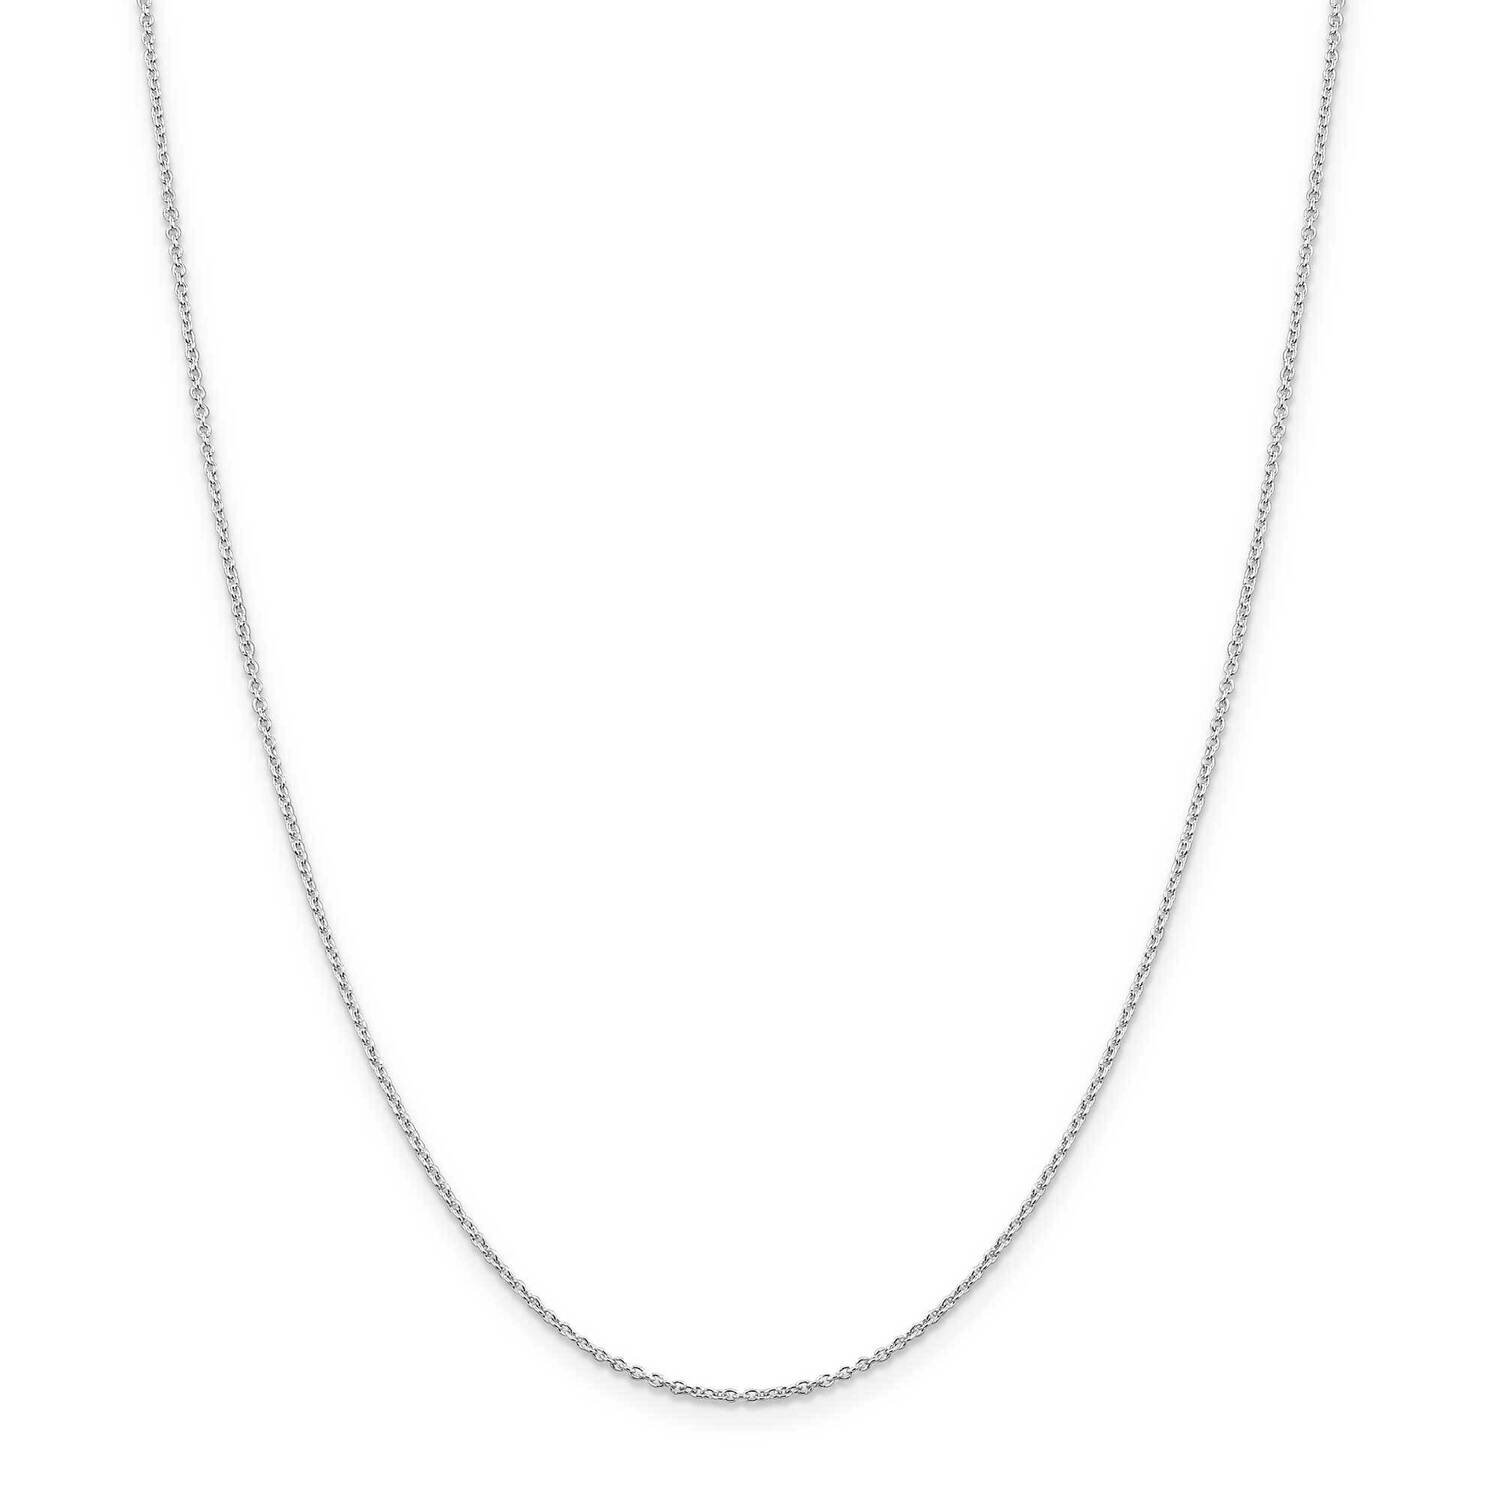 1.25mm Cable Chain 14 Inch Sterling Silver Rhodium-Plated QCL035R-14